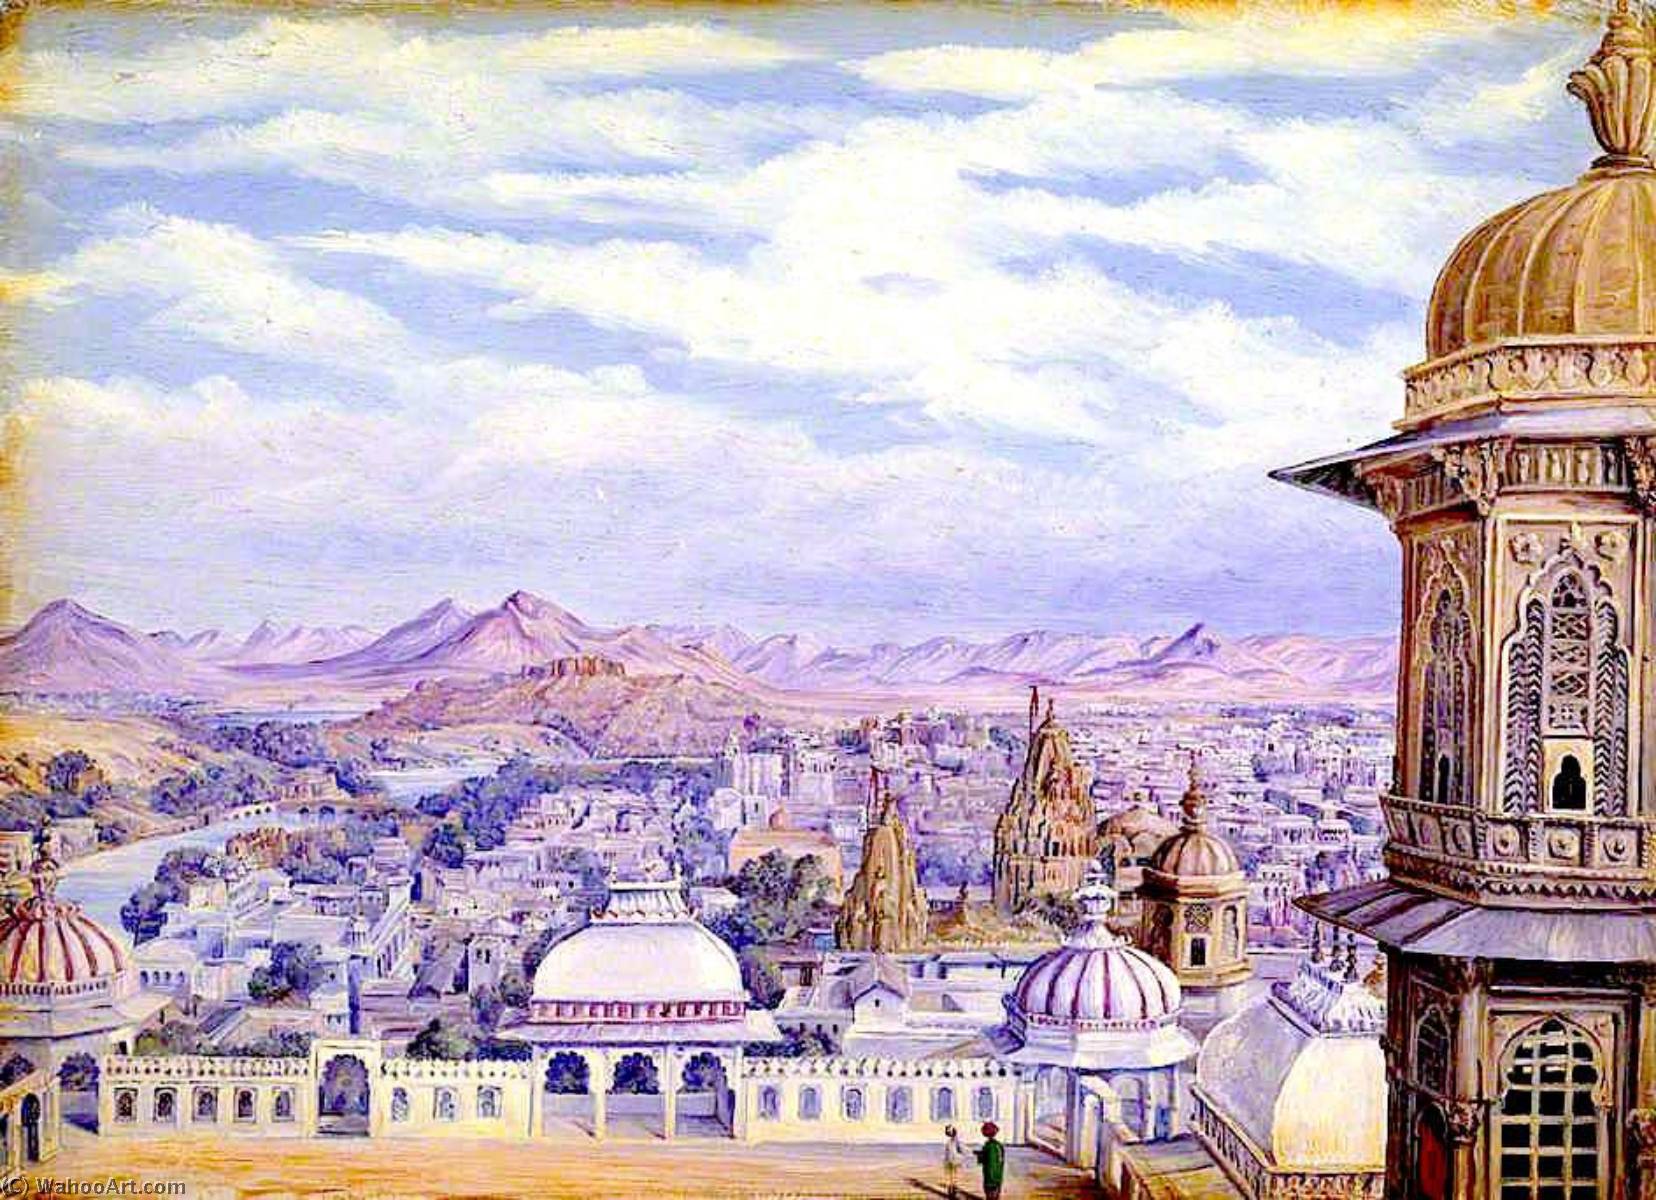 WikiOO.org - Encyclopedia of Fine Arts - Malba, Artwork Marianne North - From the Palace, Oodipore. Janr. 1879